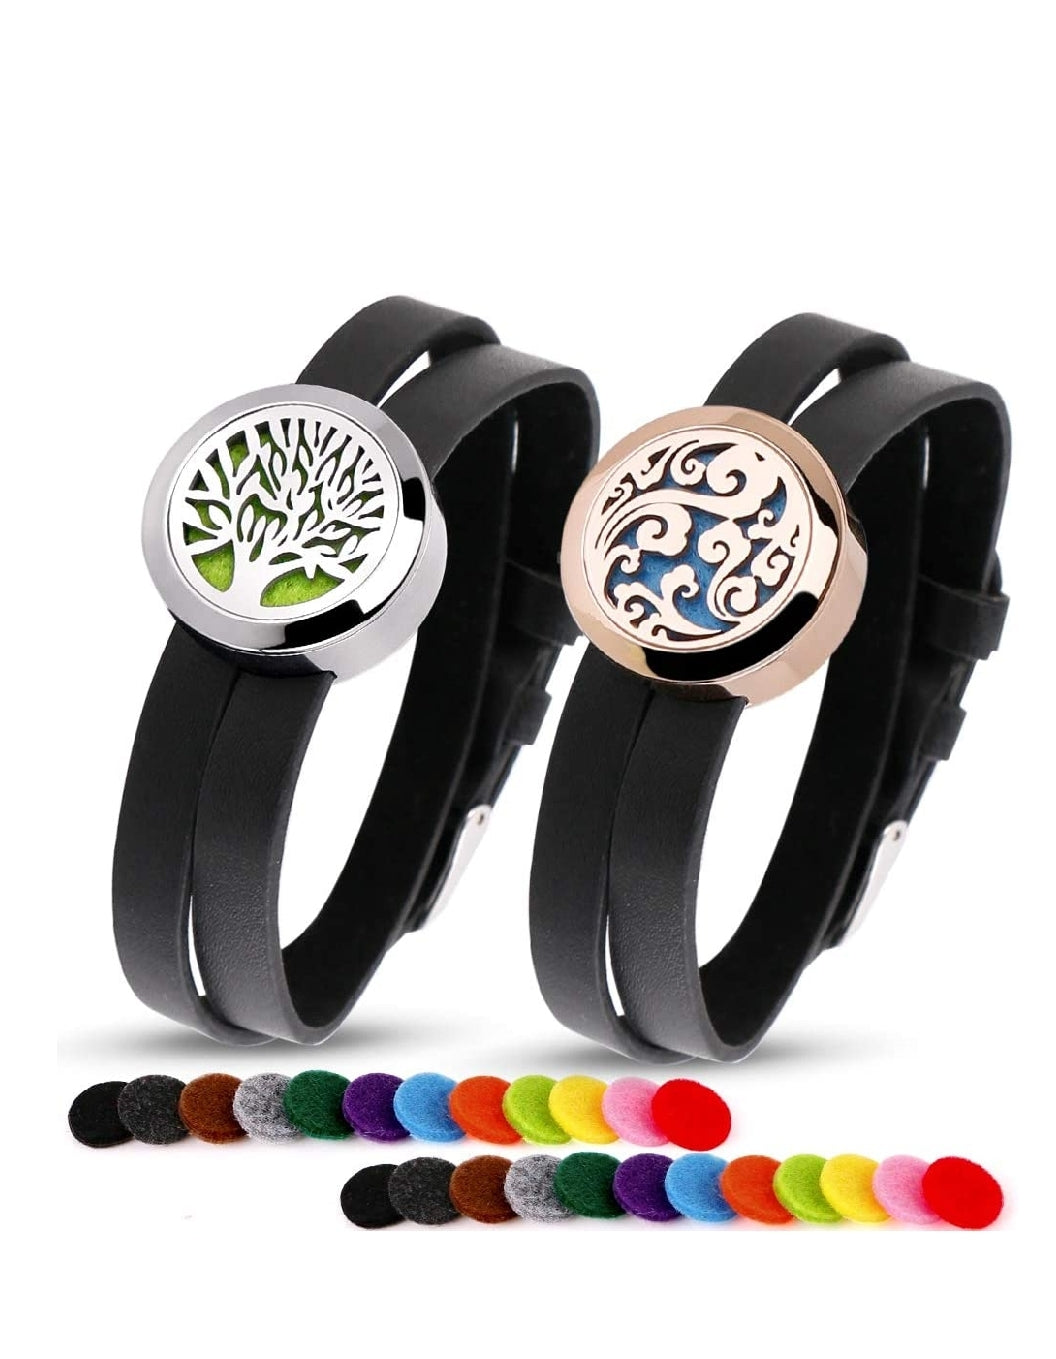 Tree of Life Aromatherapy Essential Oil Diffuser Bracelets - Her Jewel•ry Box